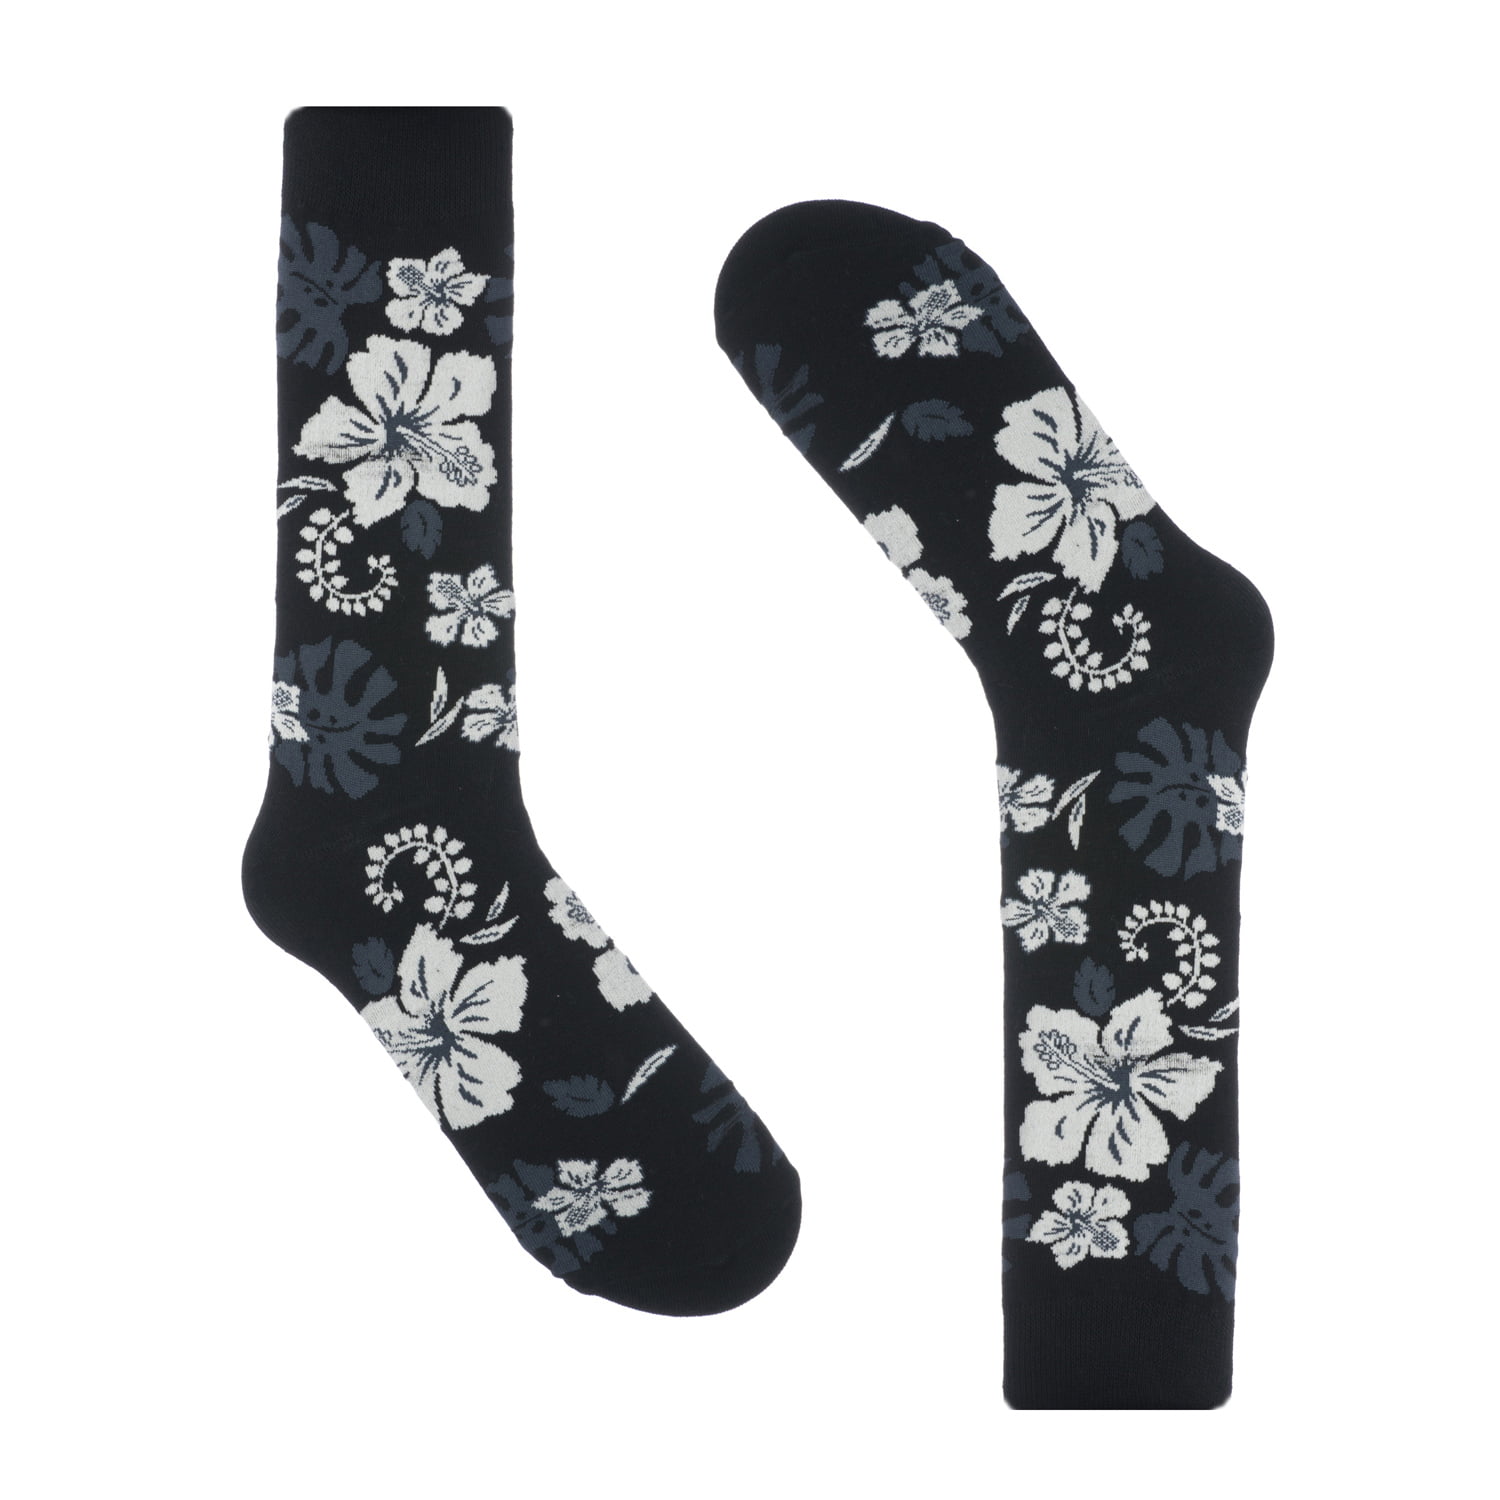 Details about   Brand new Fashion socks regular size made with Lycra will fit size 3-6 UK